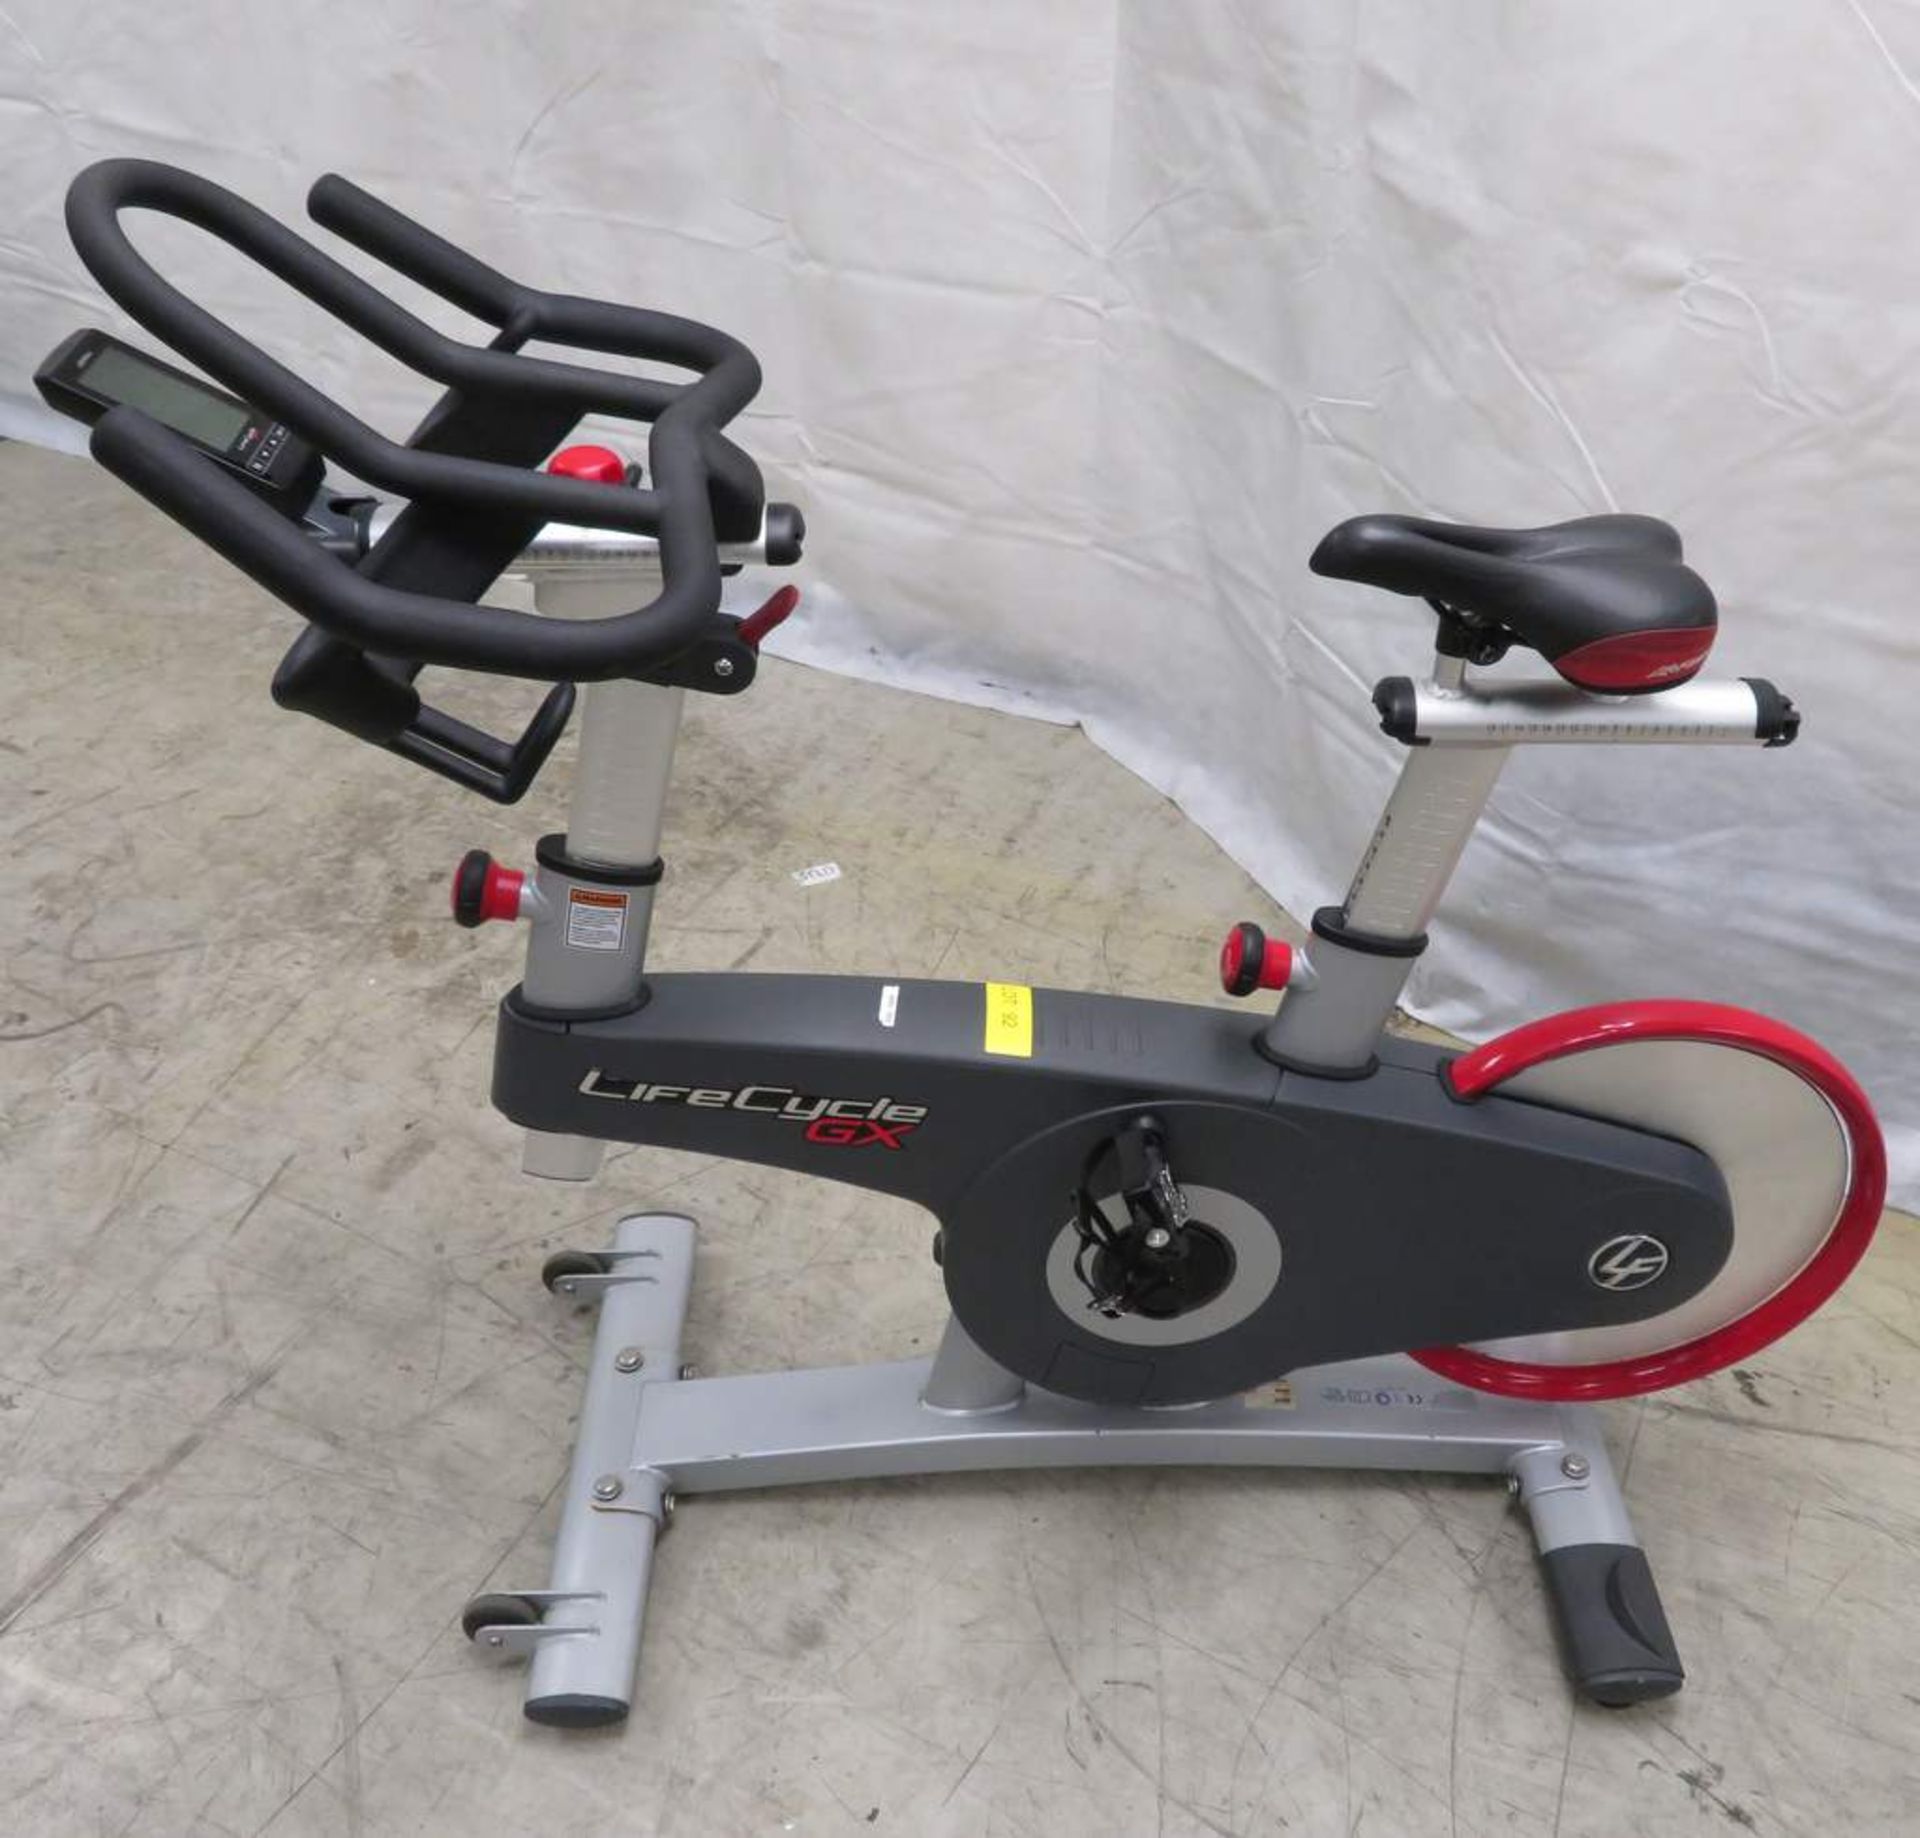 Life Fitness - Life Cycle GX spin bike - Image 2 of 12